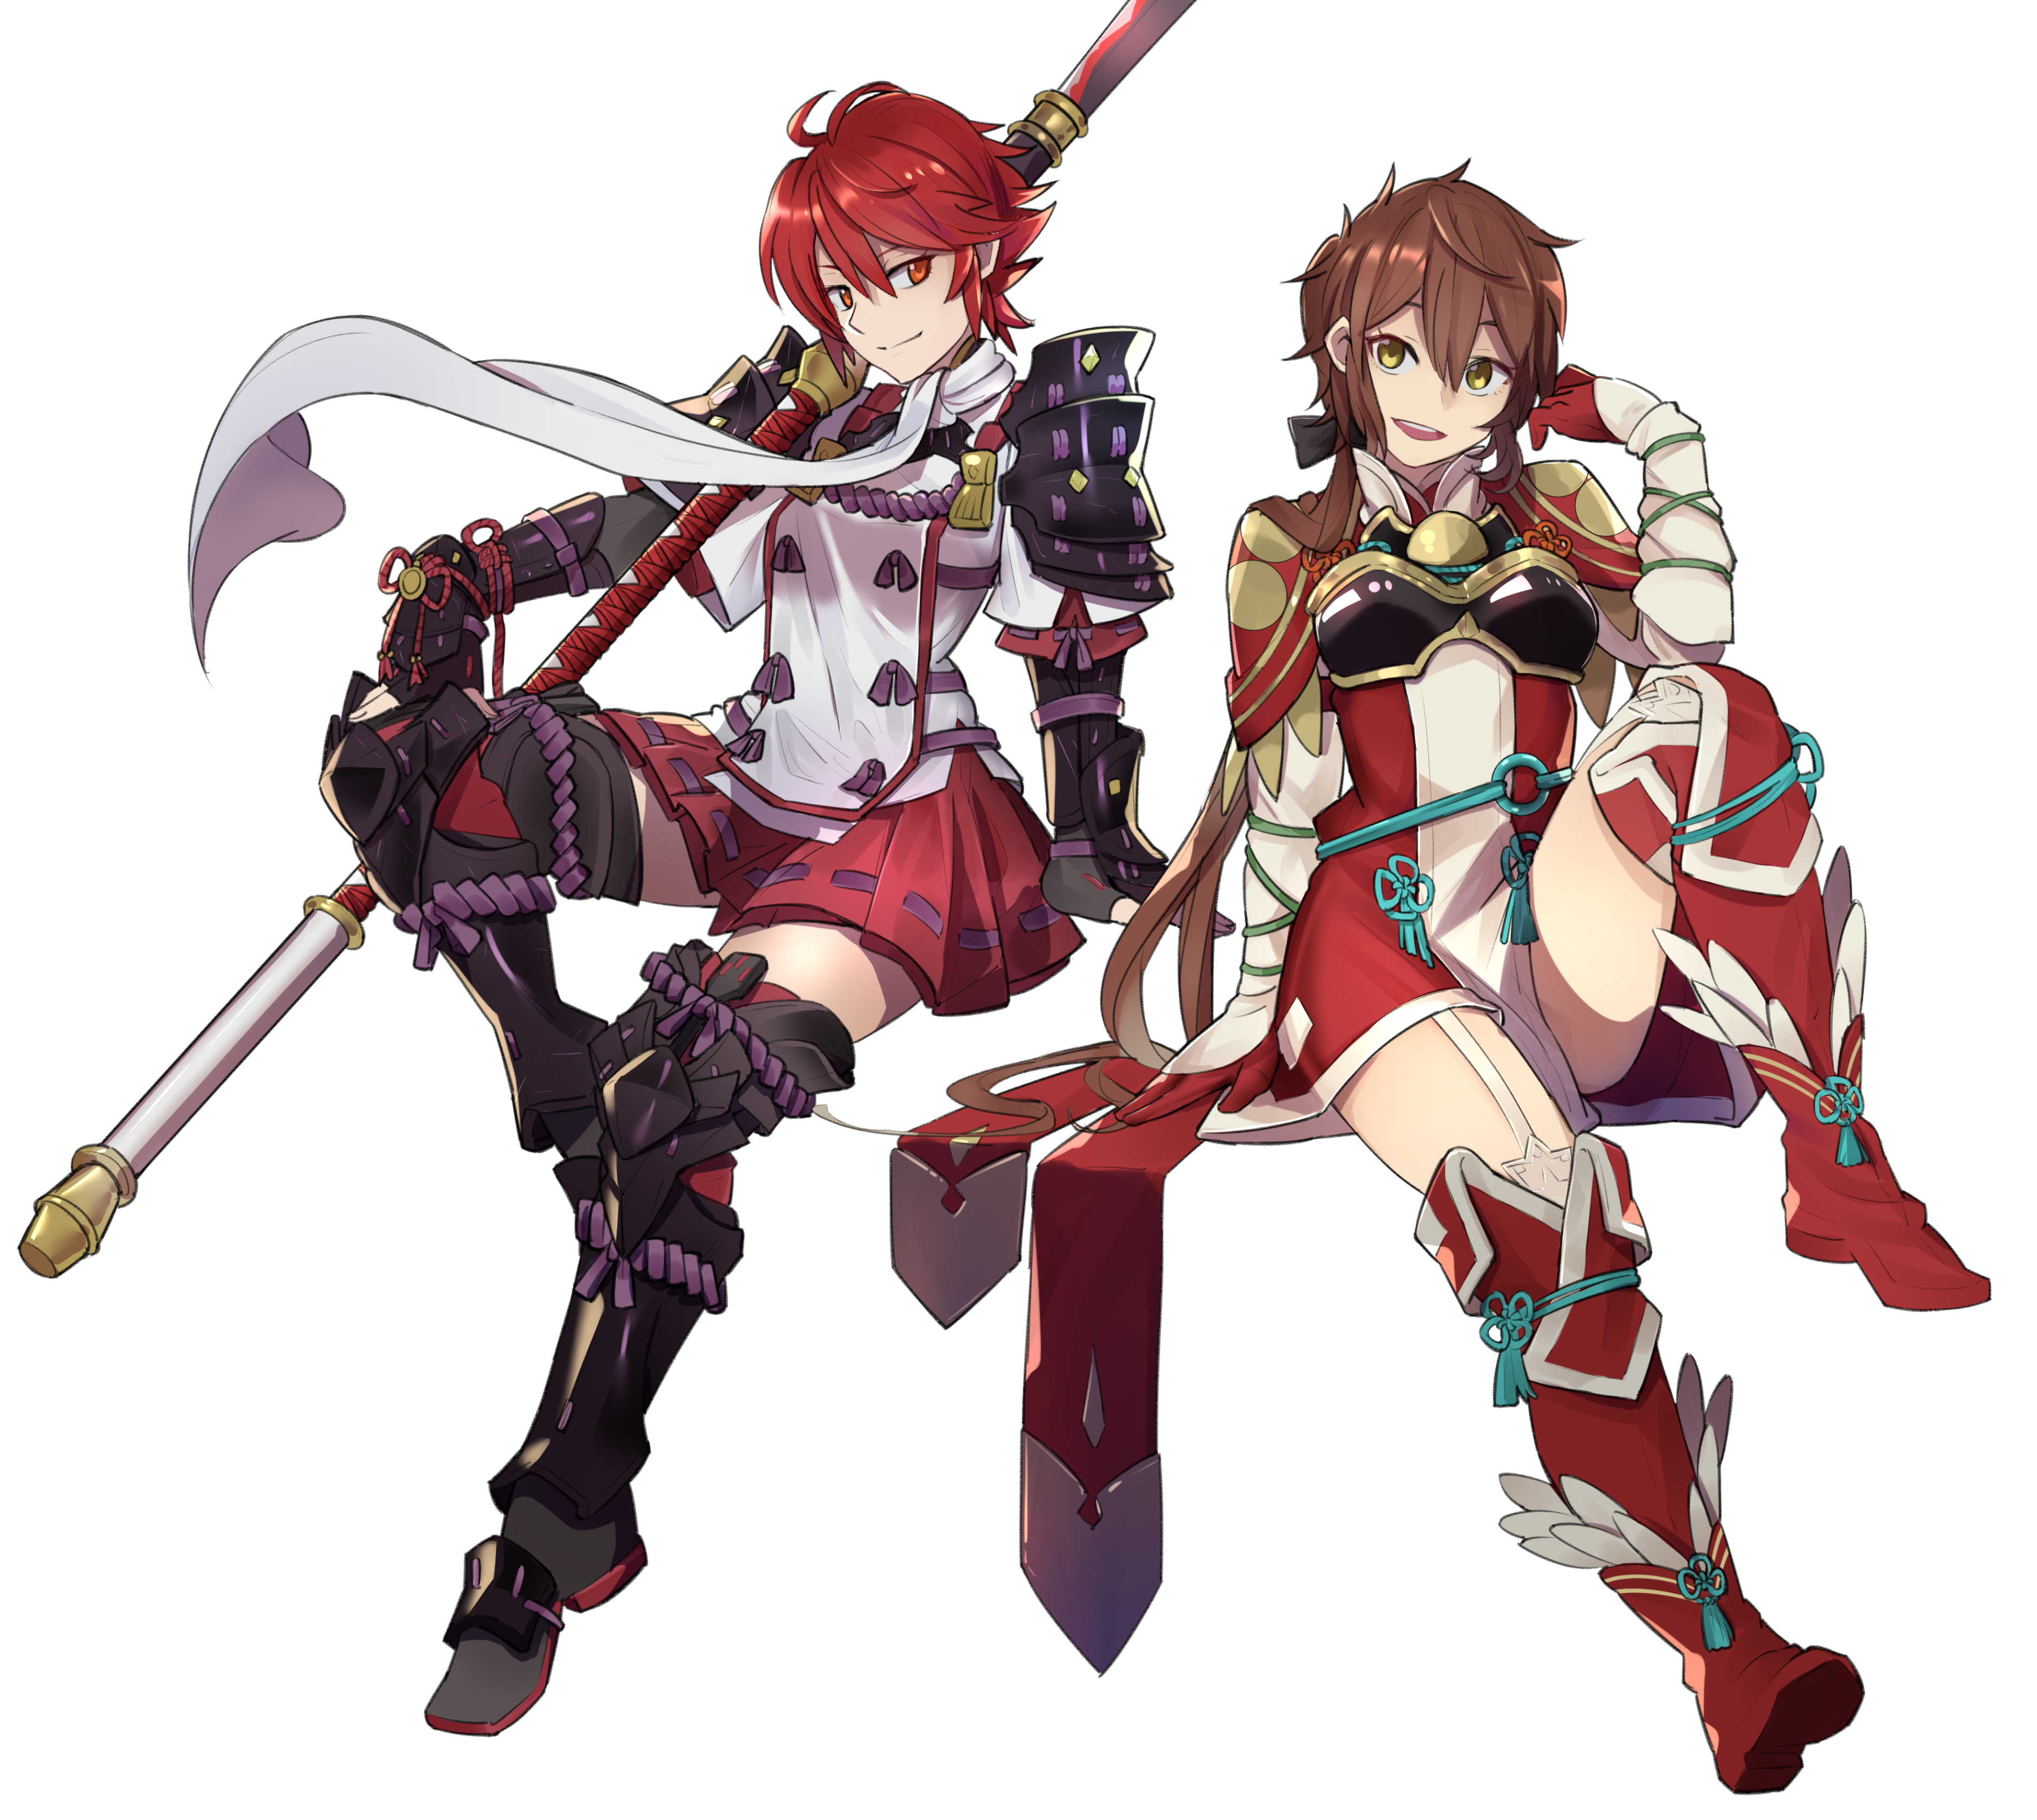 Hinoka and Lora from Fire Emblem Fates and Xenoblade.